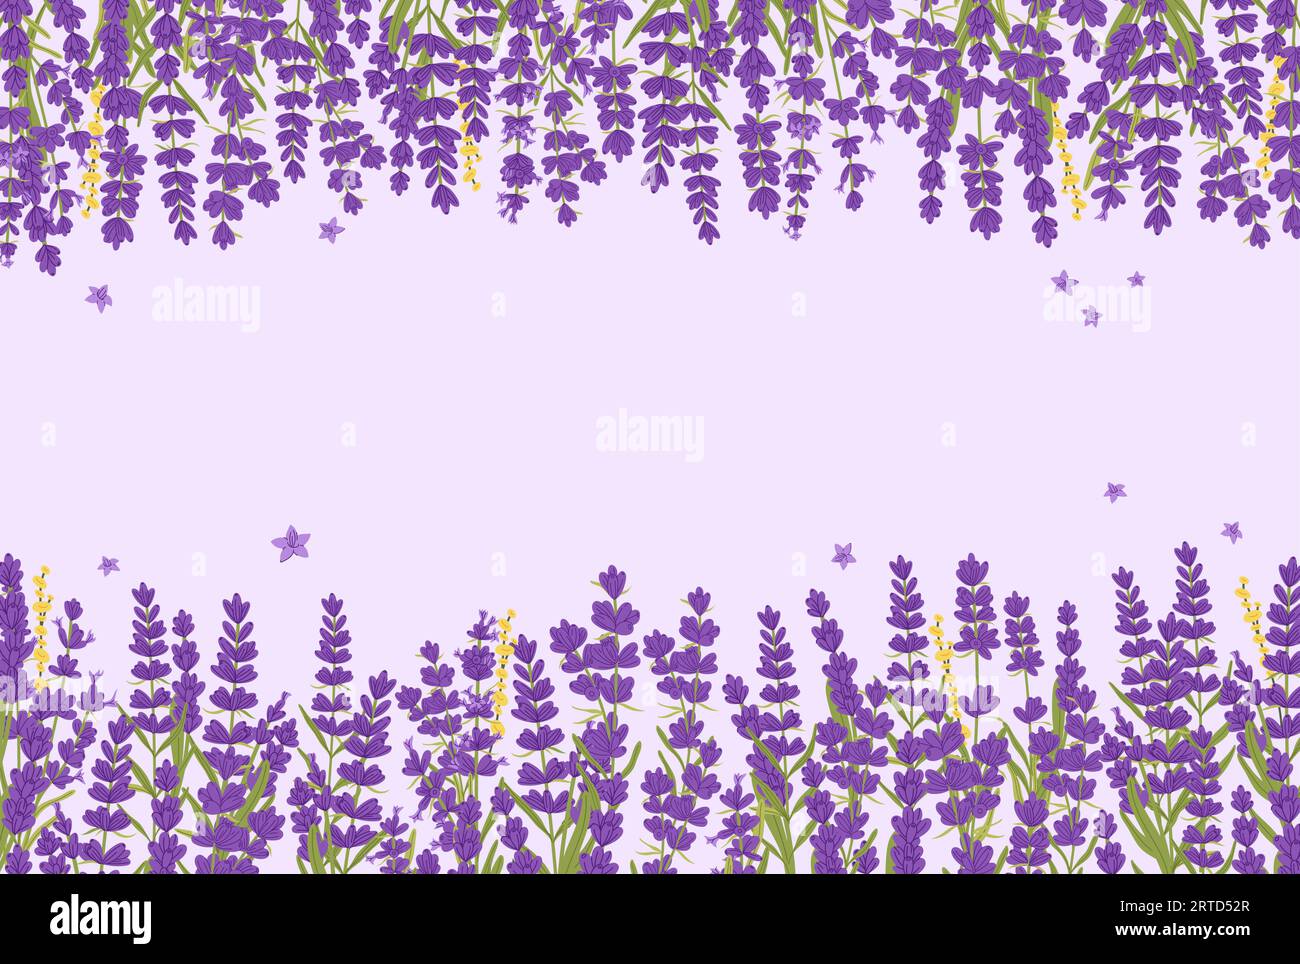 Lavender flowers background with vector floral borders of purple, violet and lilac provence lavandula blossoms. Bunches of garden plant and herb branc Stock Vector